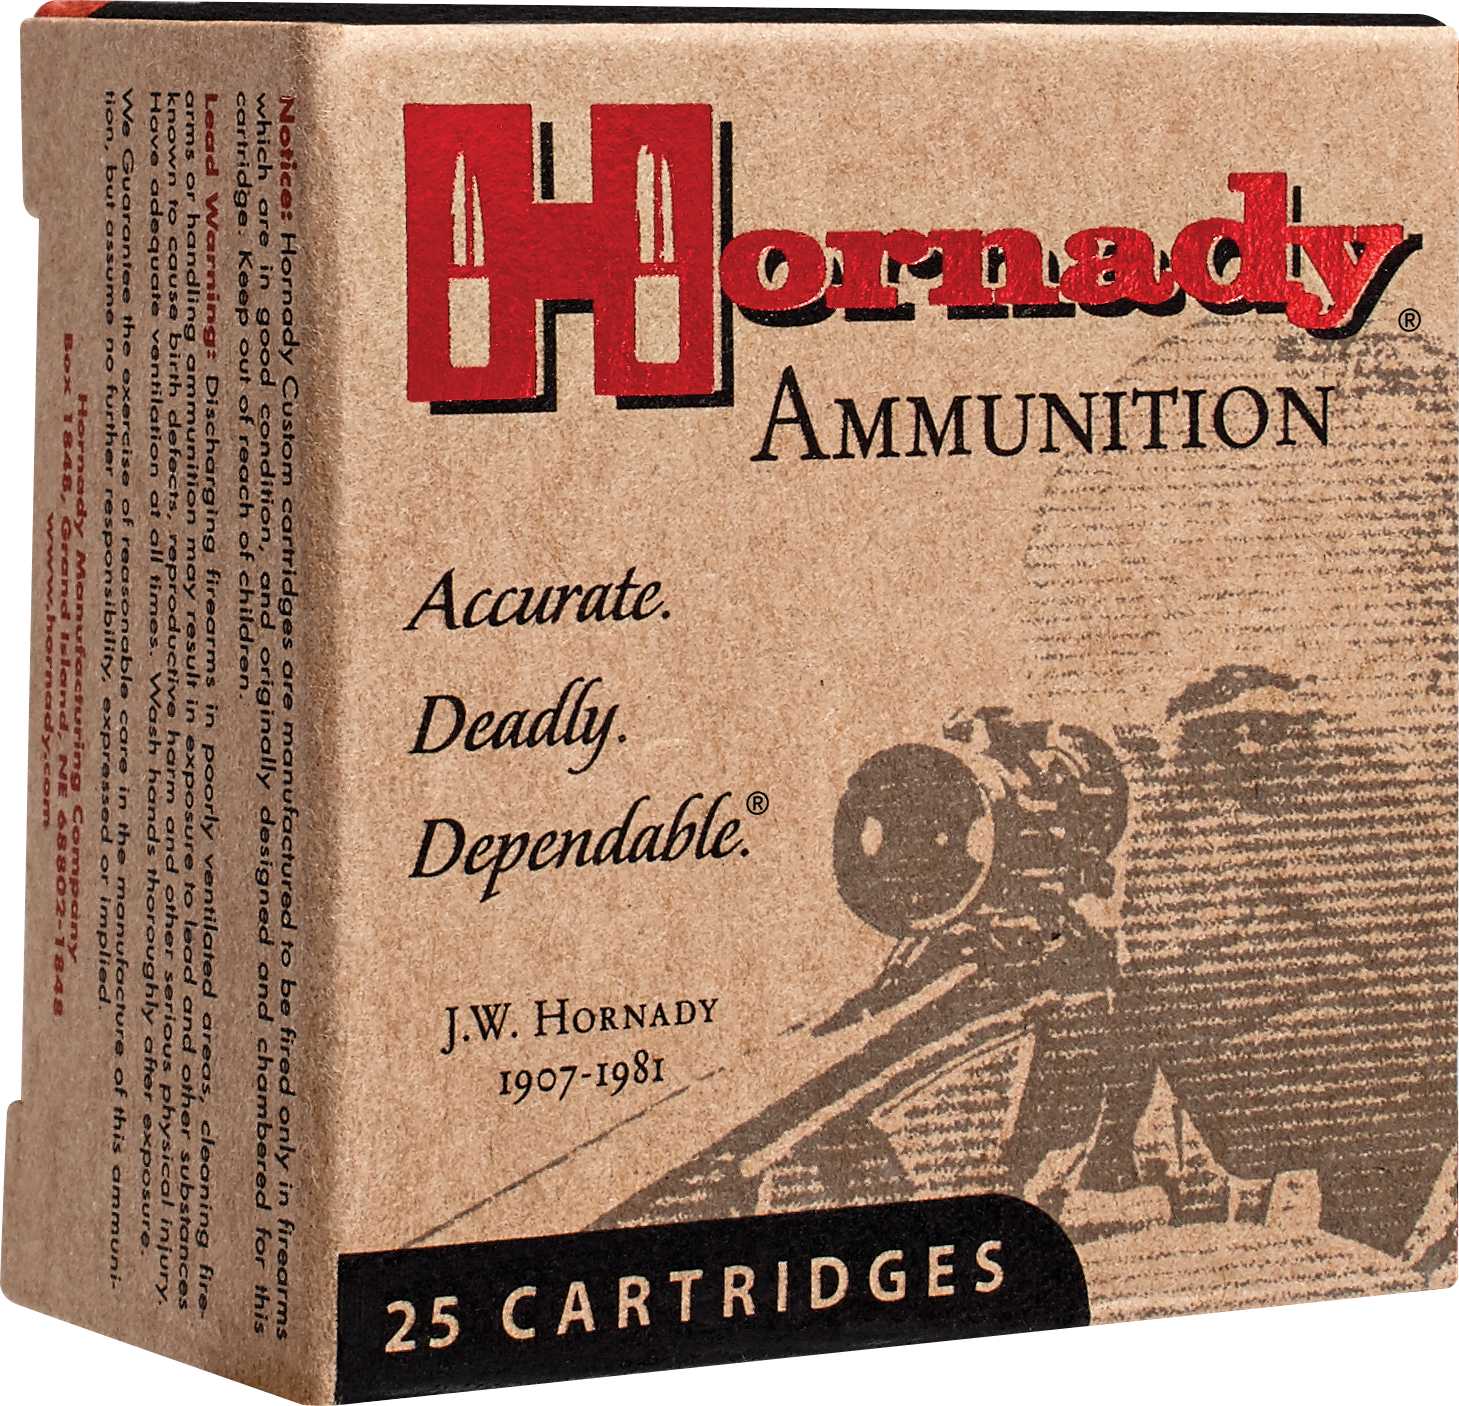 10mm 20 Rounds Ammunition Hornady 180 Grain Jacketed Hollow Point